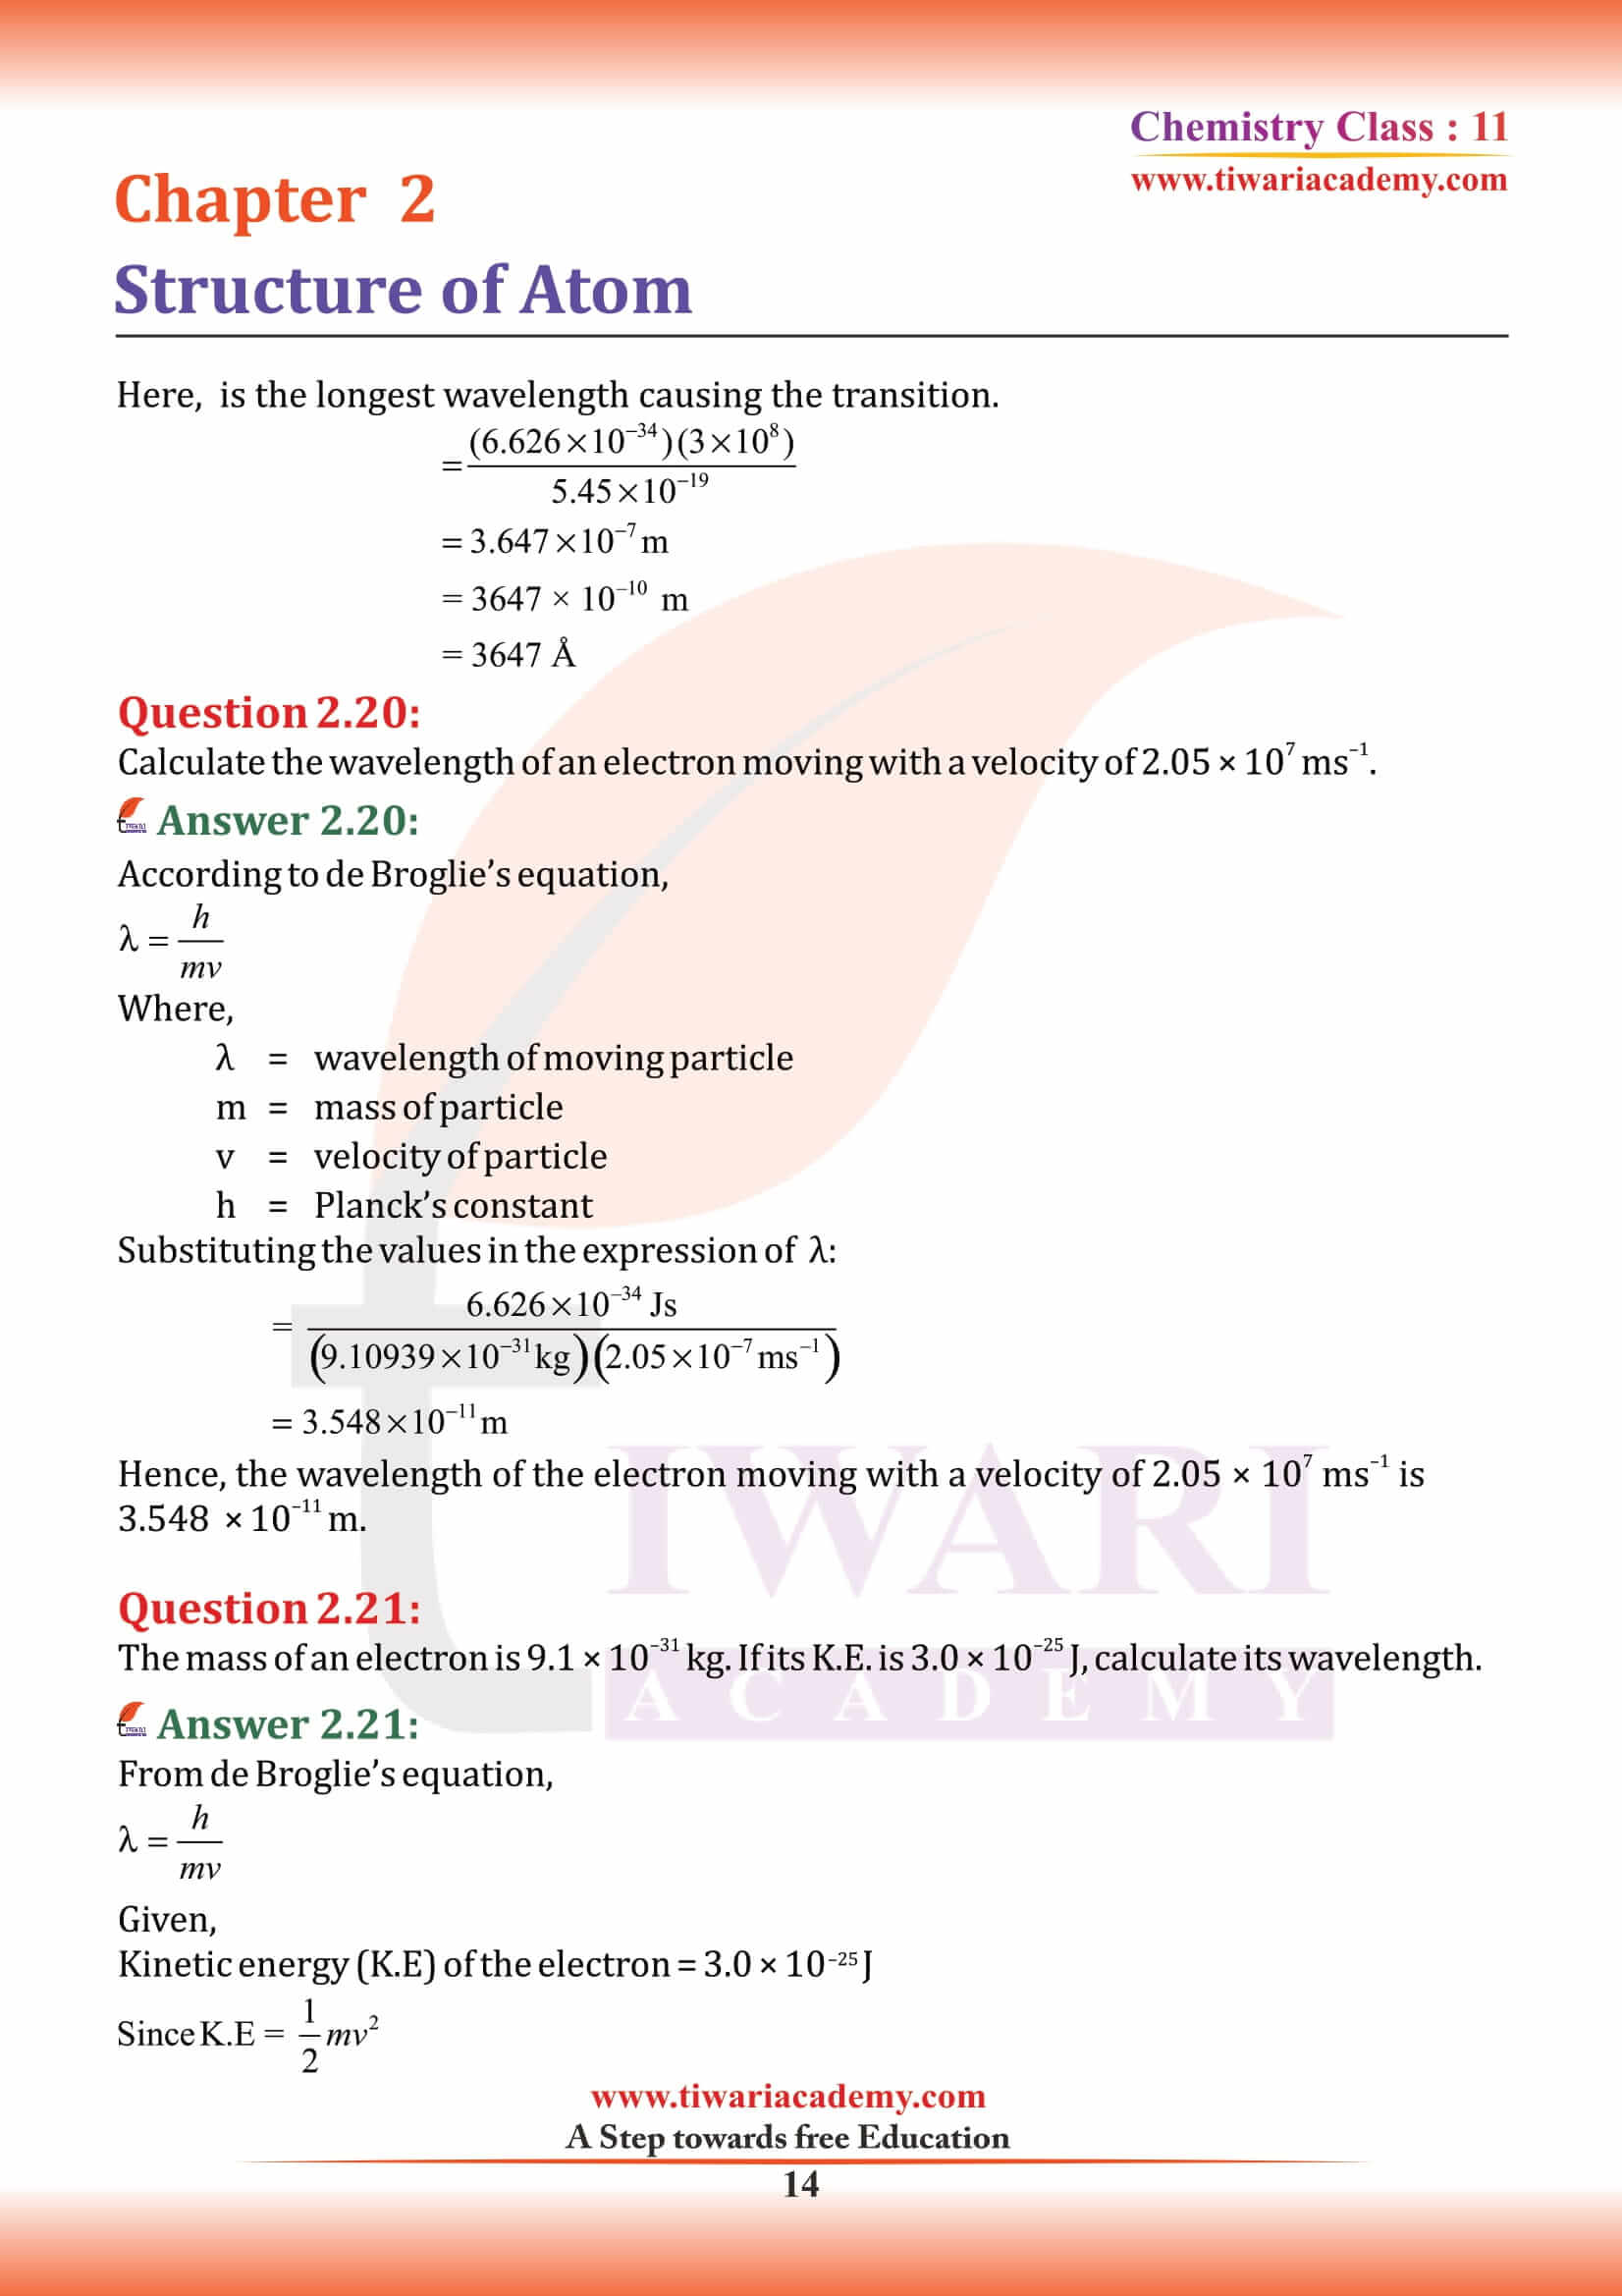 NCERT Solutions for Class 11 Chemistry Chapter 2 answers in English